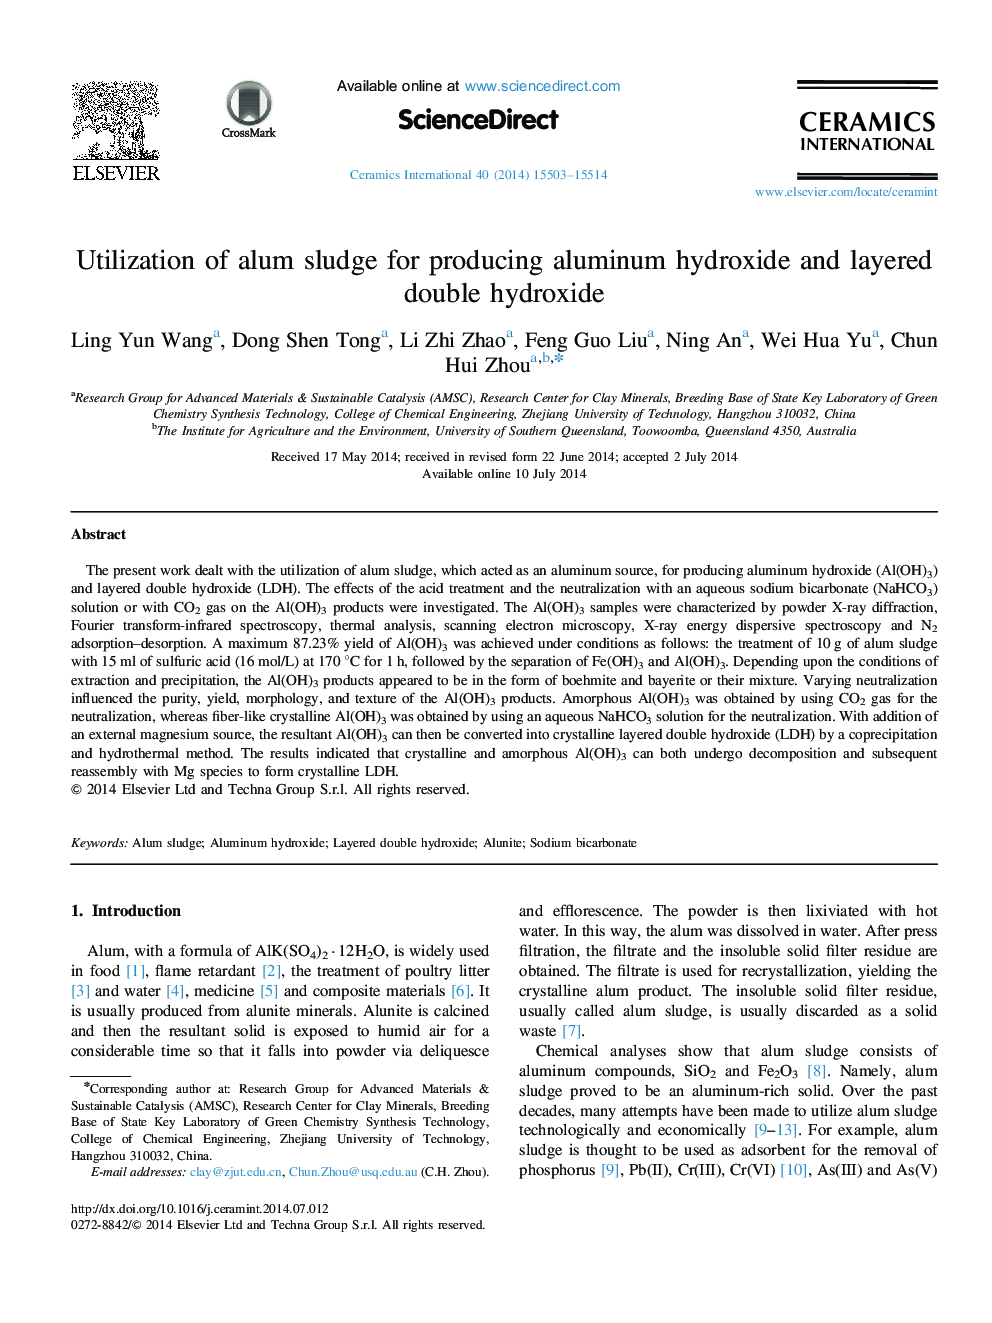 Utilization of alum sludge for producing aluminum hydroxide and layered double hydroxide